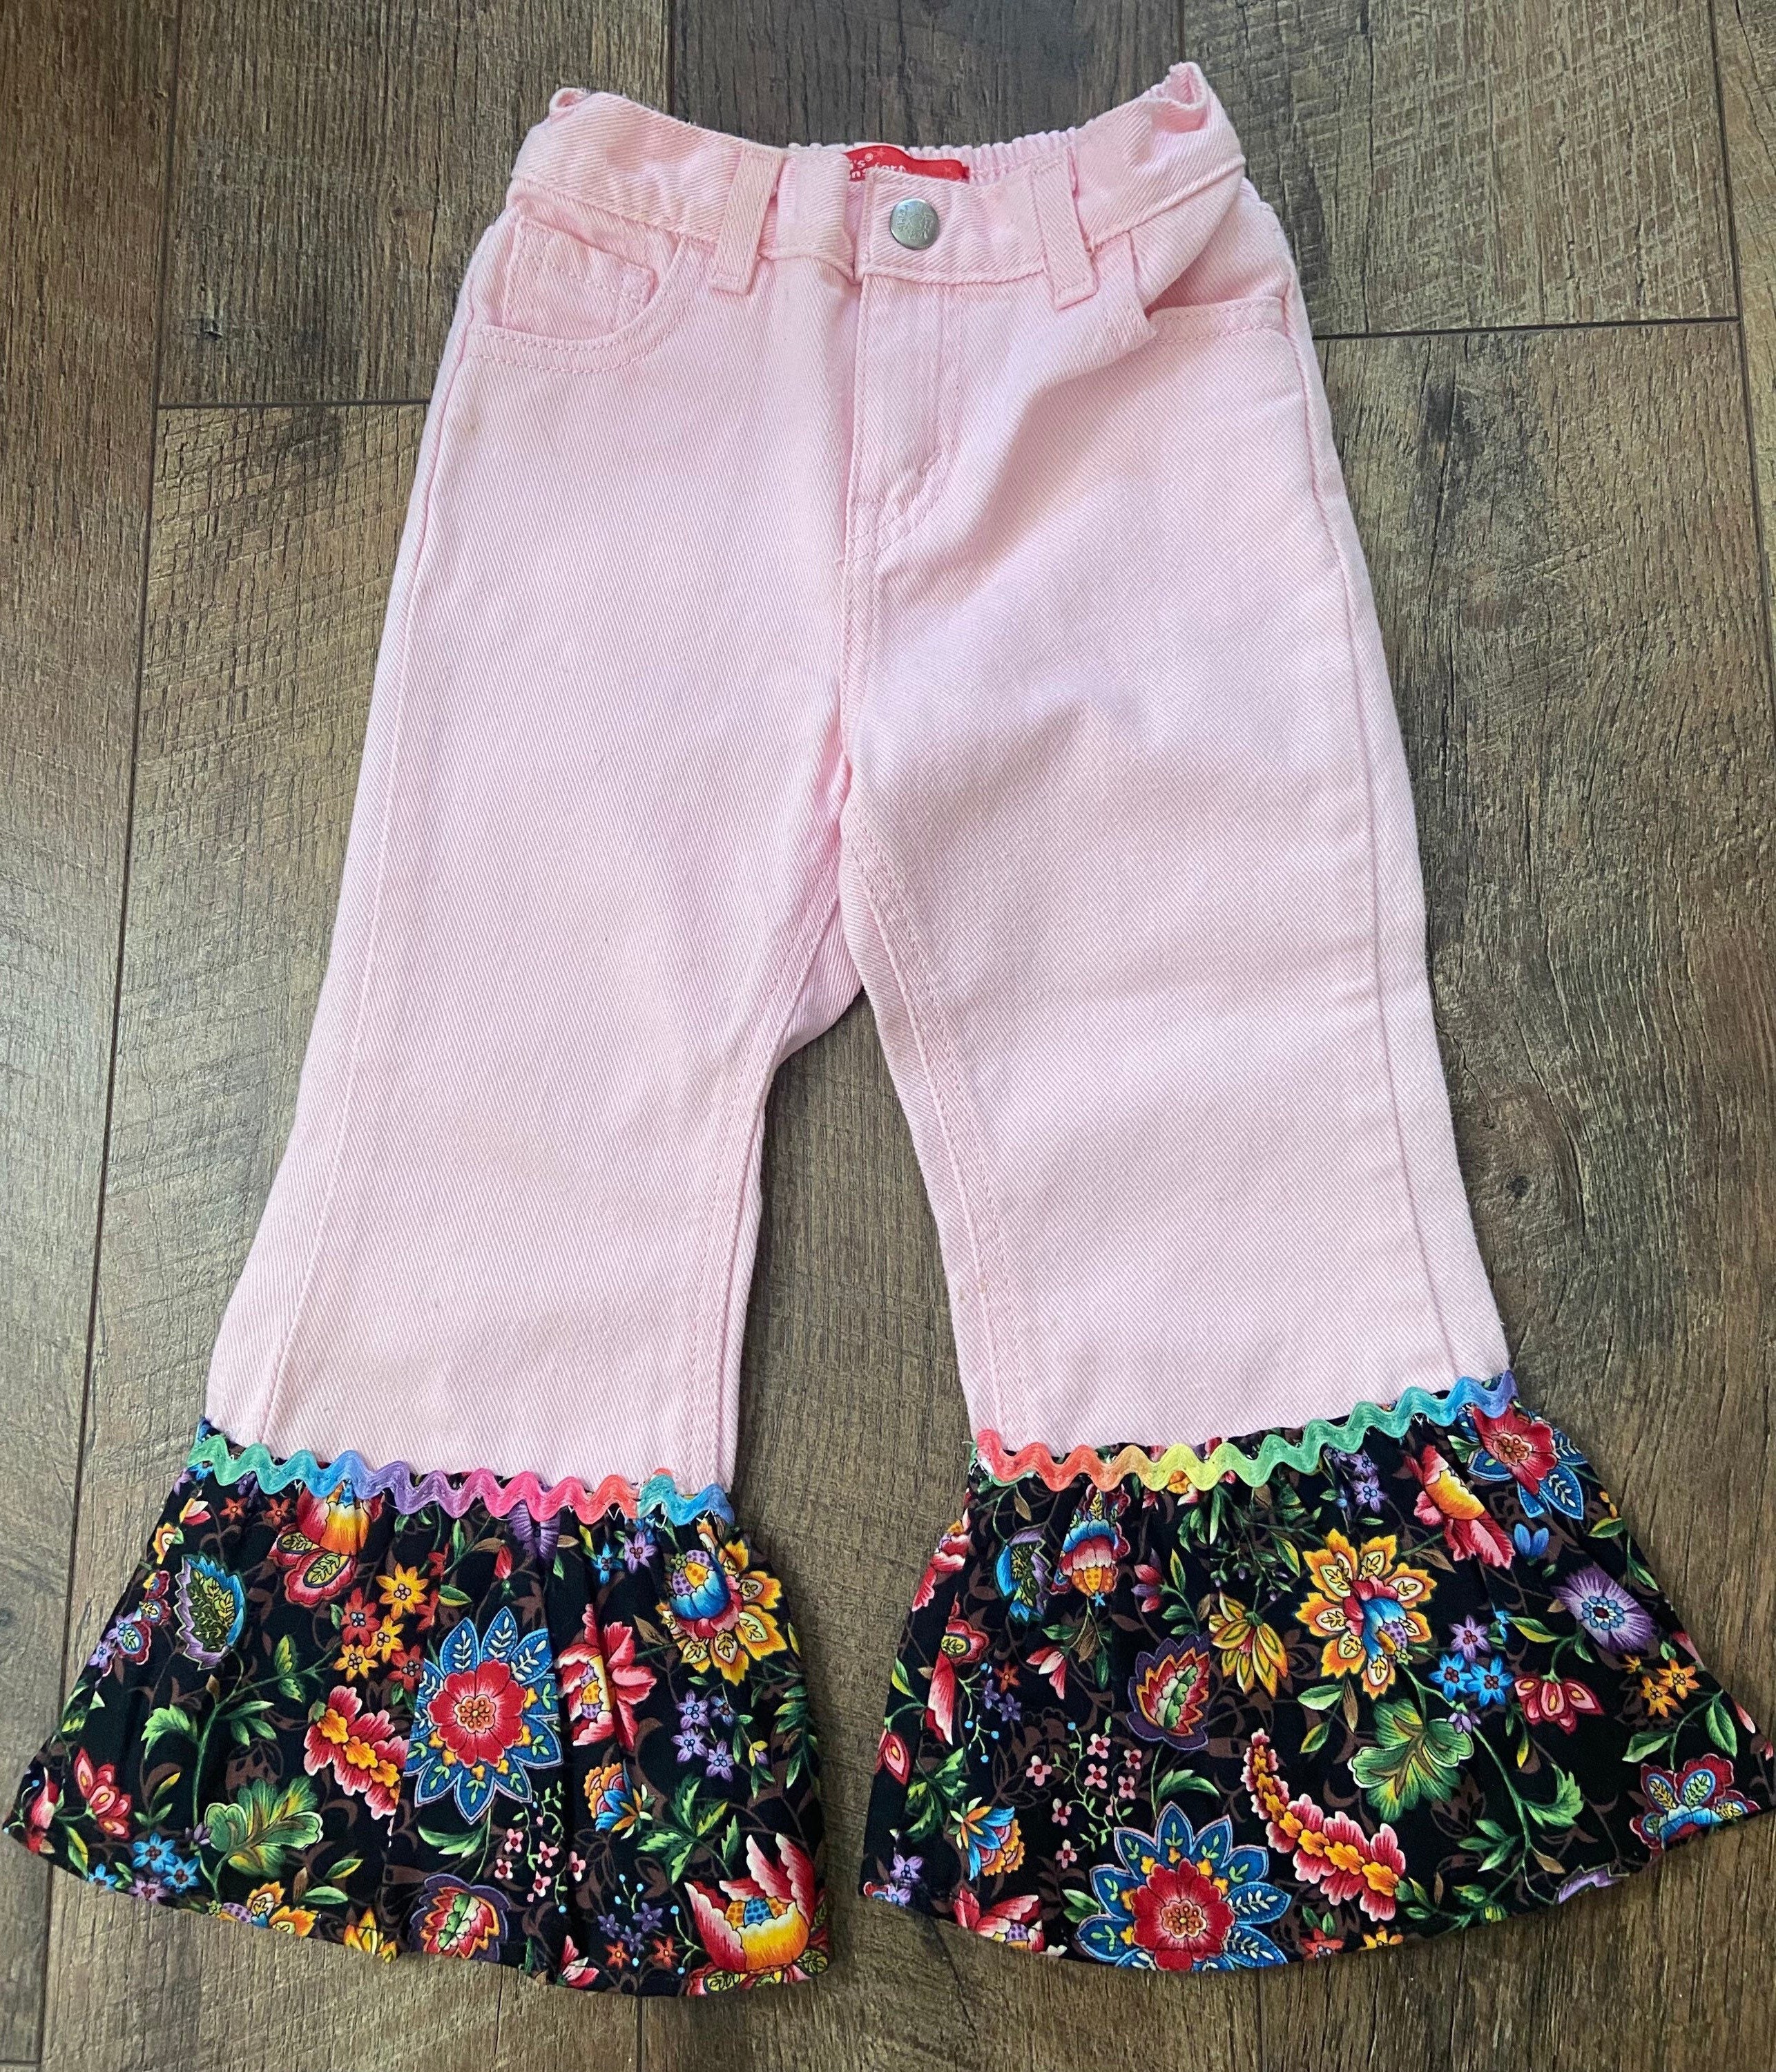 Toddler Up Cycle Levi Jeans Girls Sewn Floral Bell - Etsy